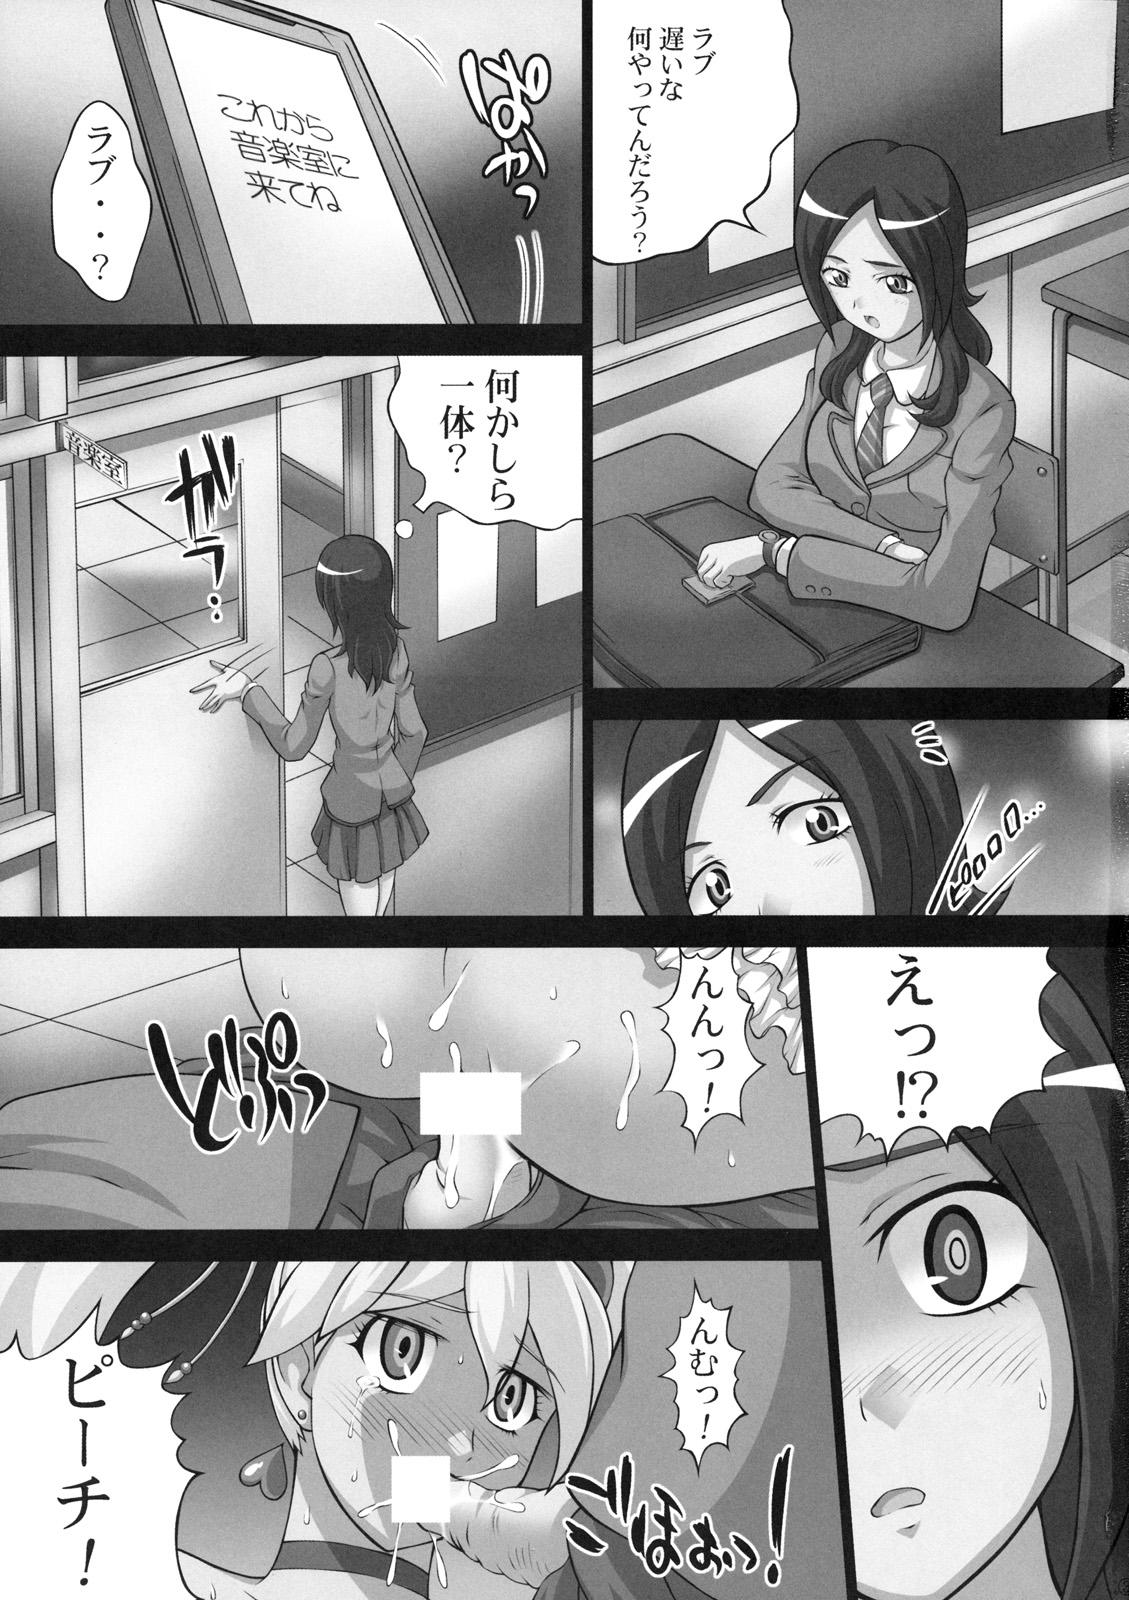 Butt Sex Kaikan Get Dayo 2 - Fresh precure Gay 3some - Page 4